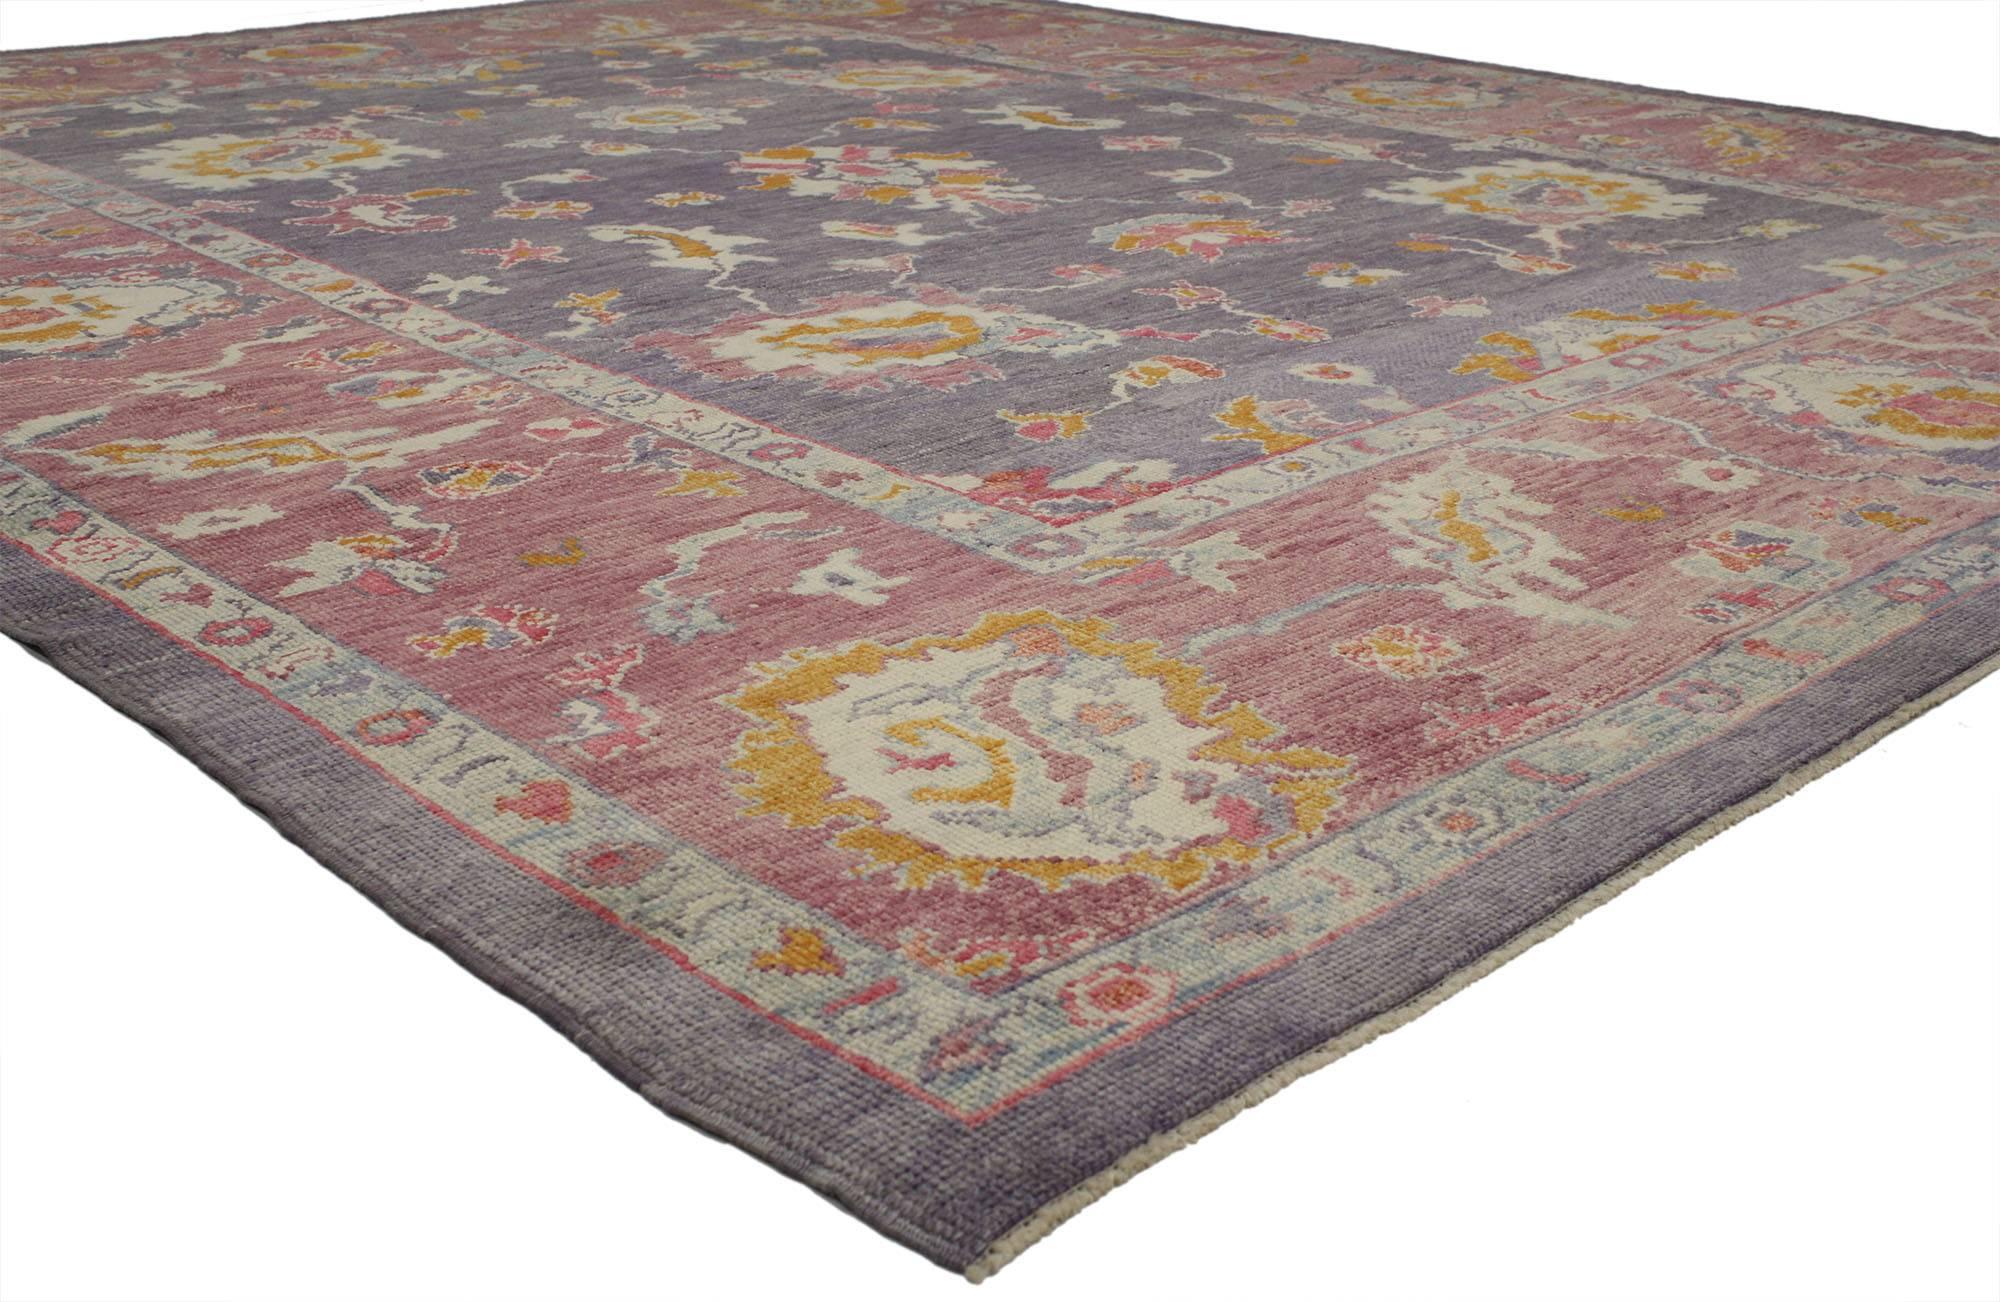 52241 Contemporary Turkish Oushak Rug with Modern Cosmopolitan Style. With a sophisticated palette of pinks and purples combined with a modern cosmopolitan style, this new colorful Turkish Oushak rug is poised to impress. It features an all-over